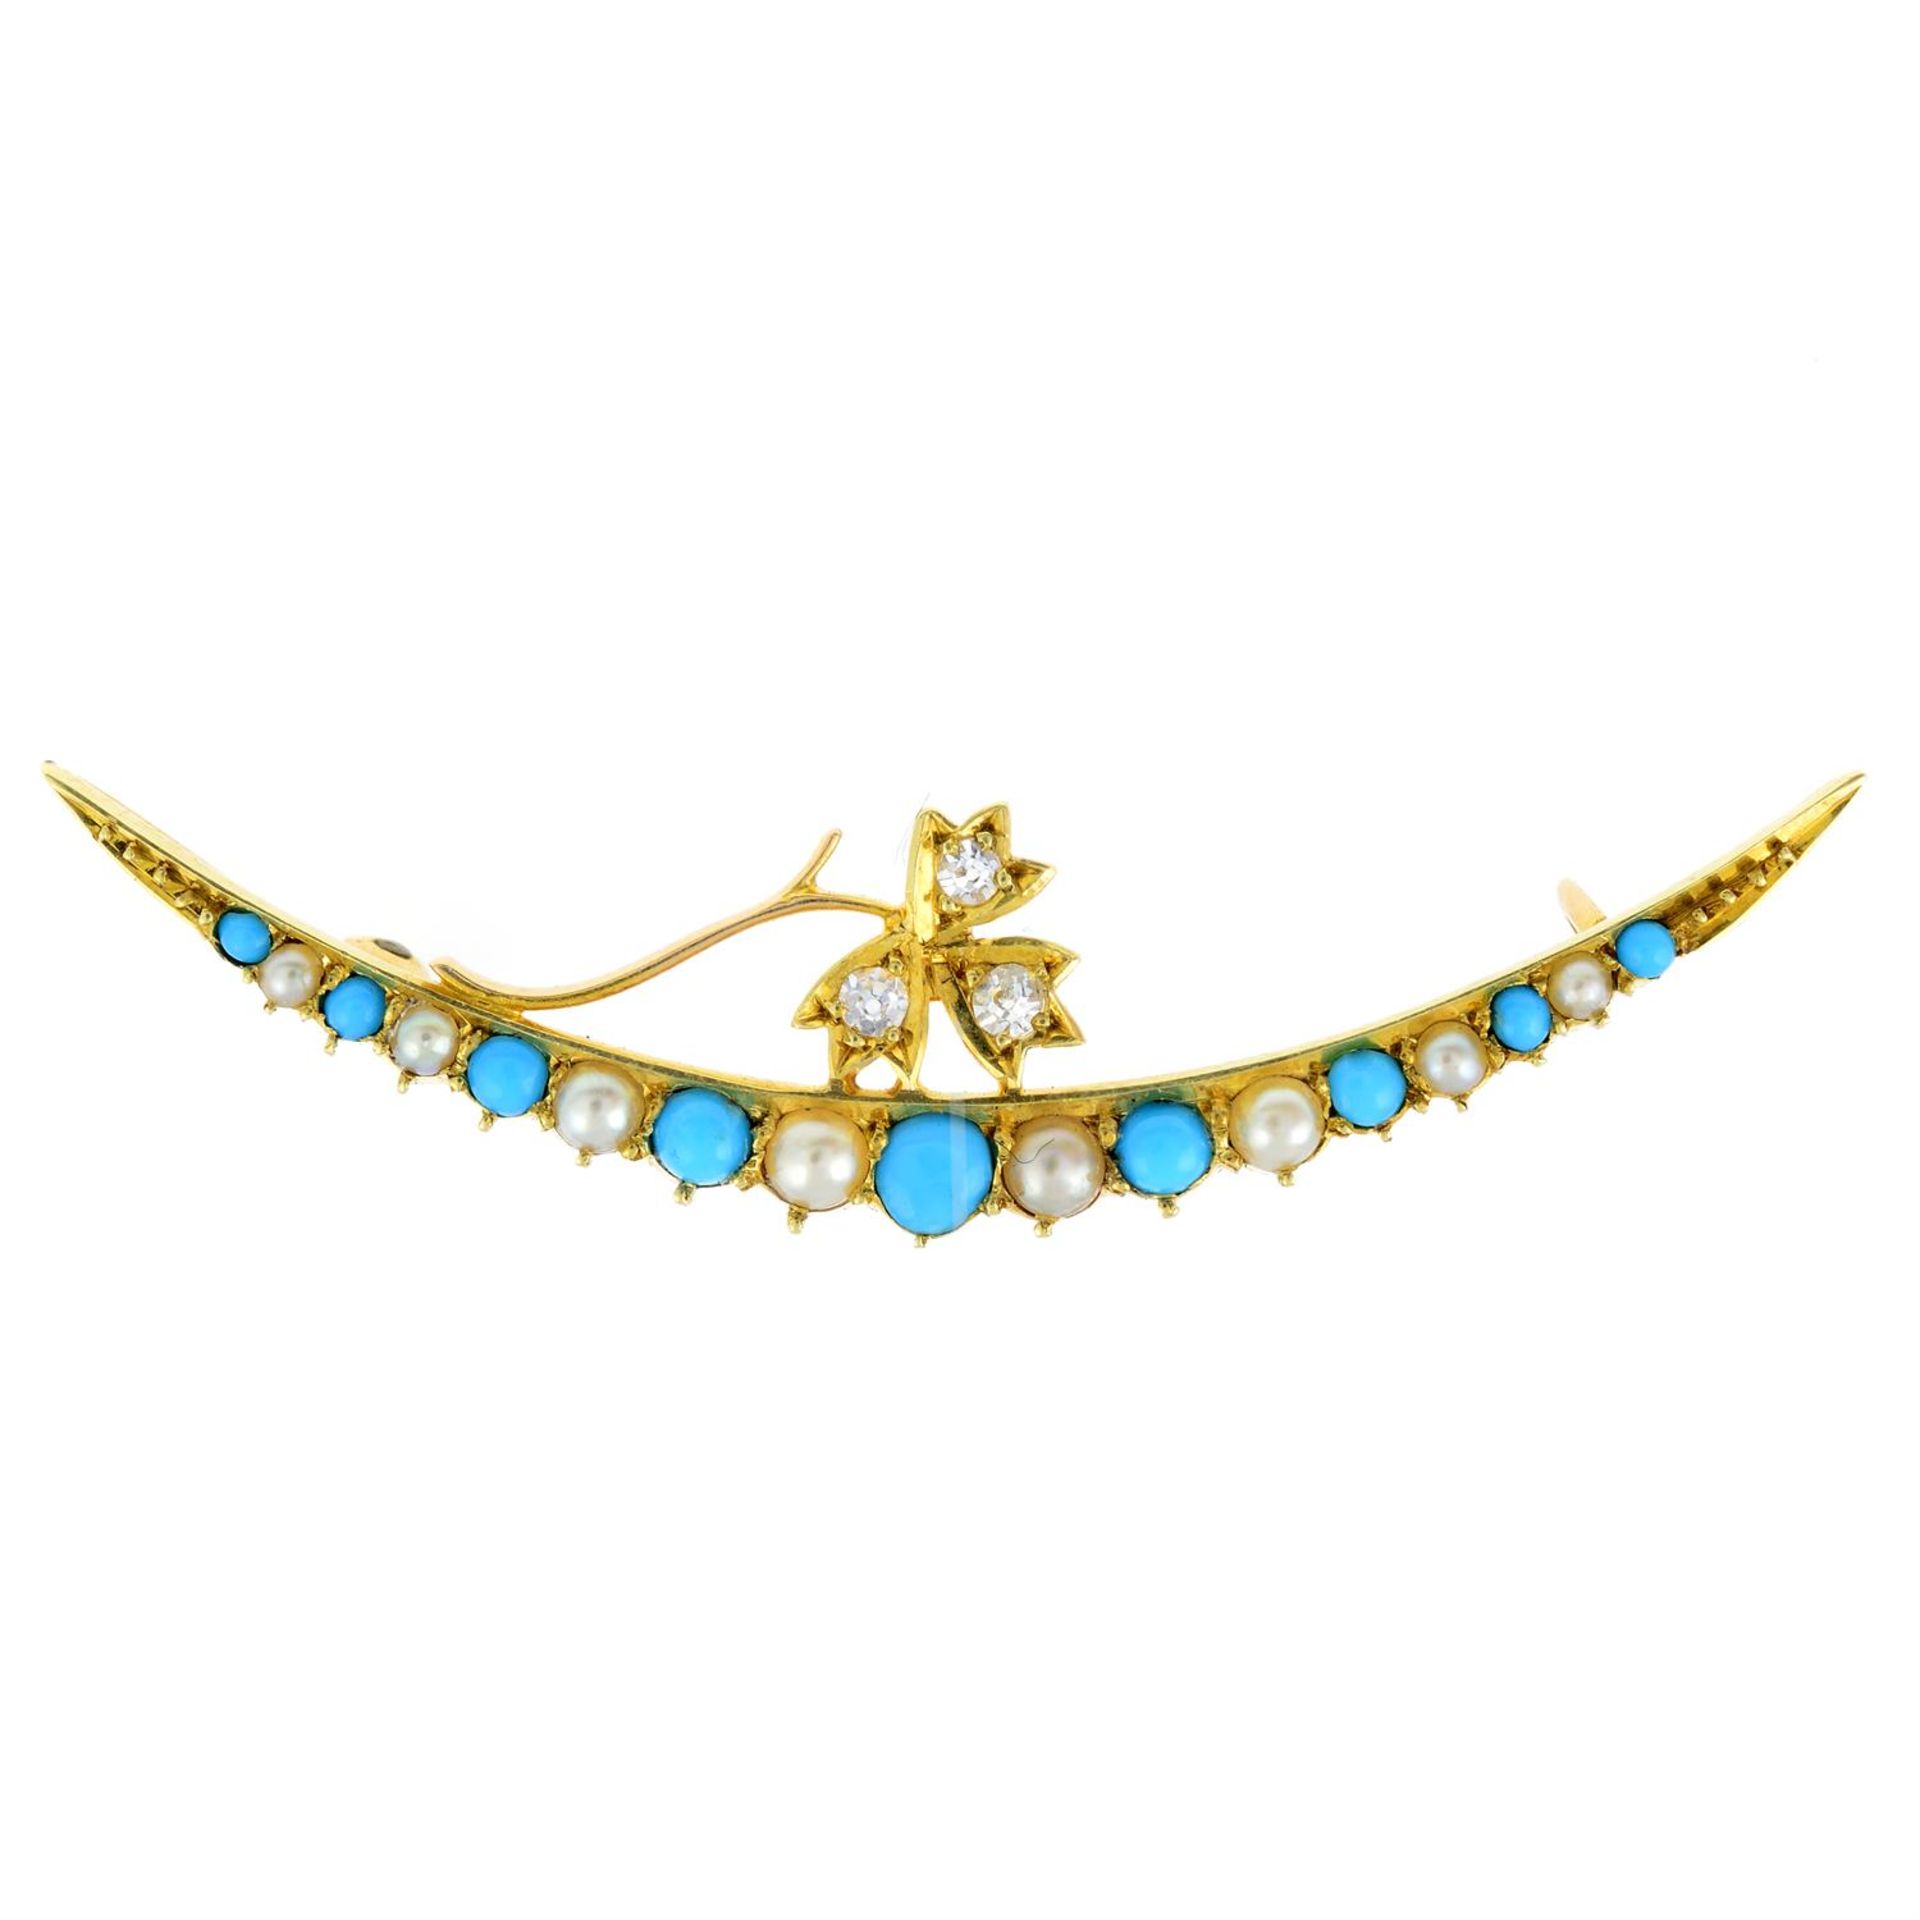 An early 20th century 15ct gold turquoise and seed pearl crescent moon brooch, with old-cut diamond